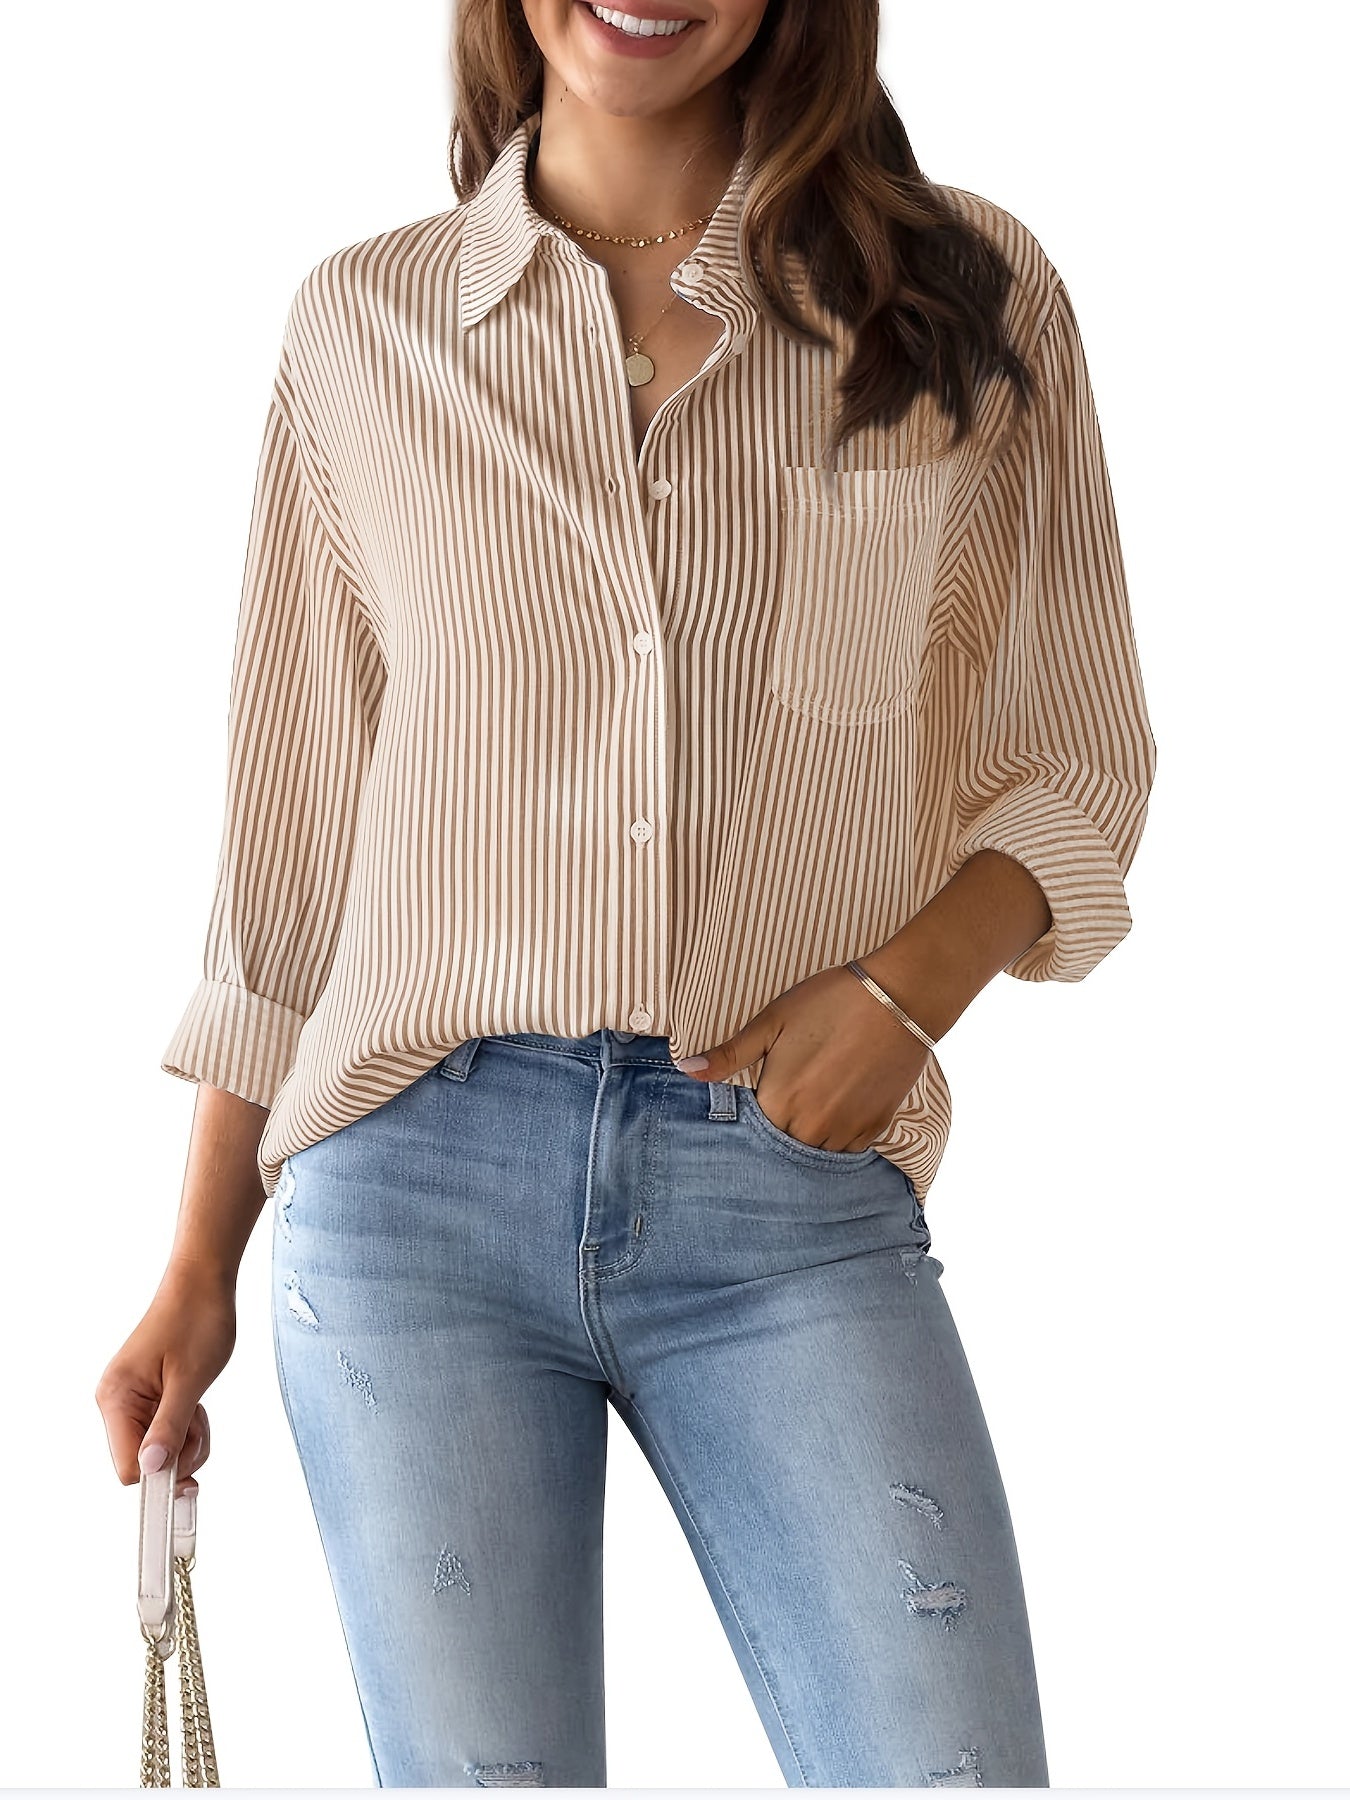 「lovevop」Women's Loose Striped Blouse, Crew Neck Long Sleeve Blouse, Casual Every Day Blouse, Women's Clothing